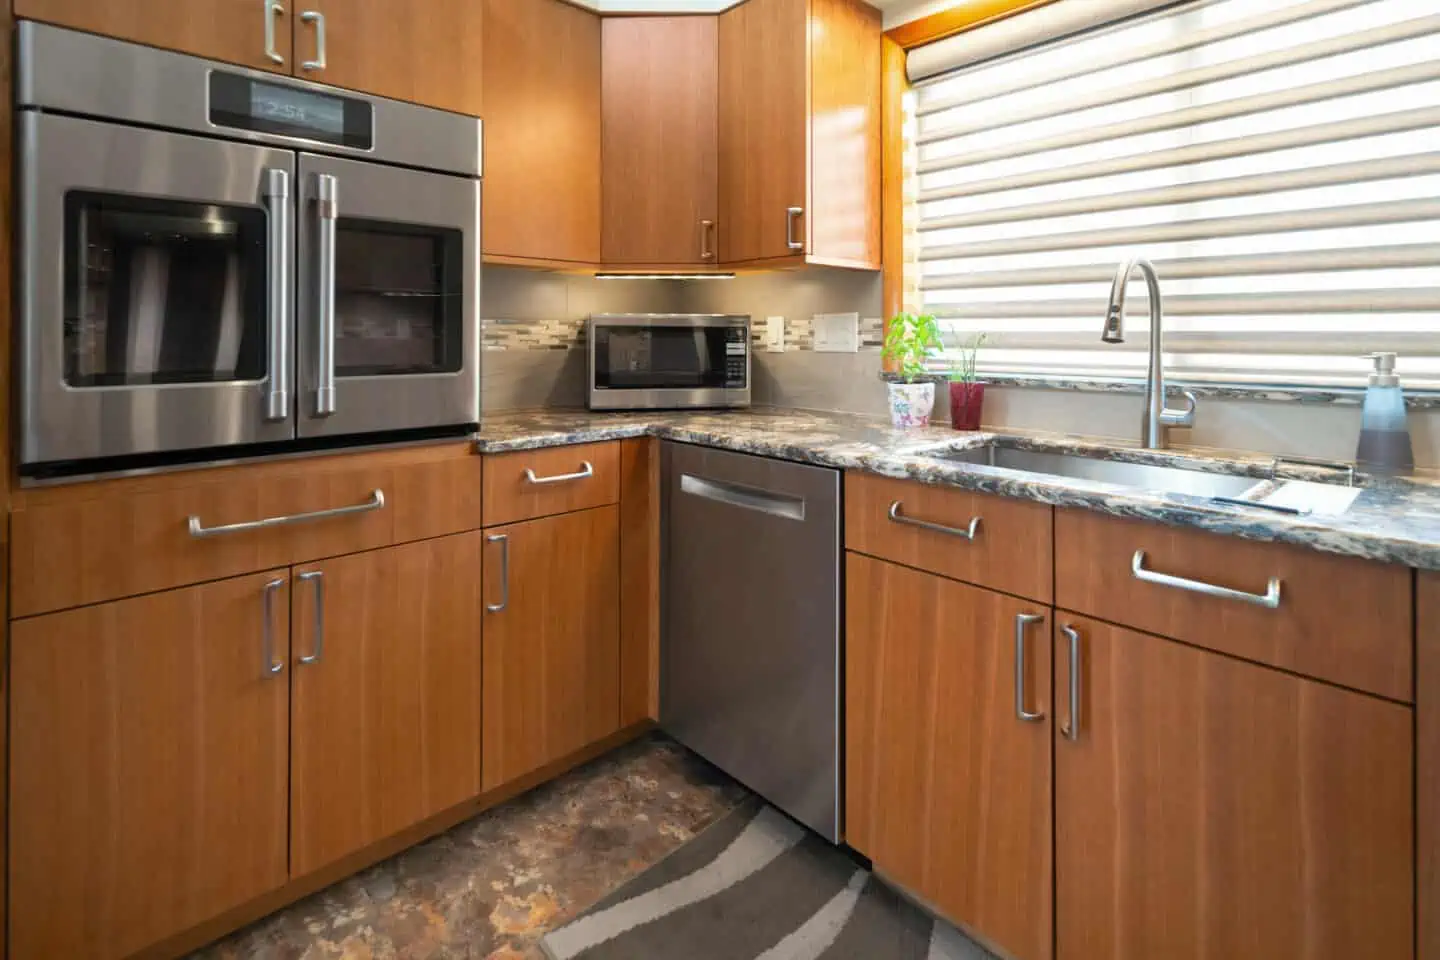 Remodeled kitchen with cabinet mounted oven